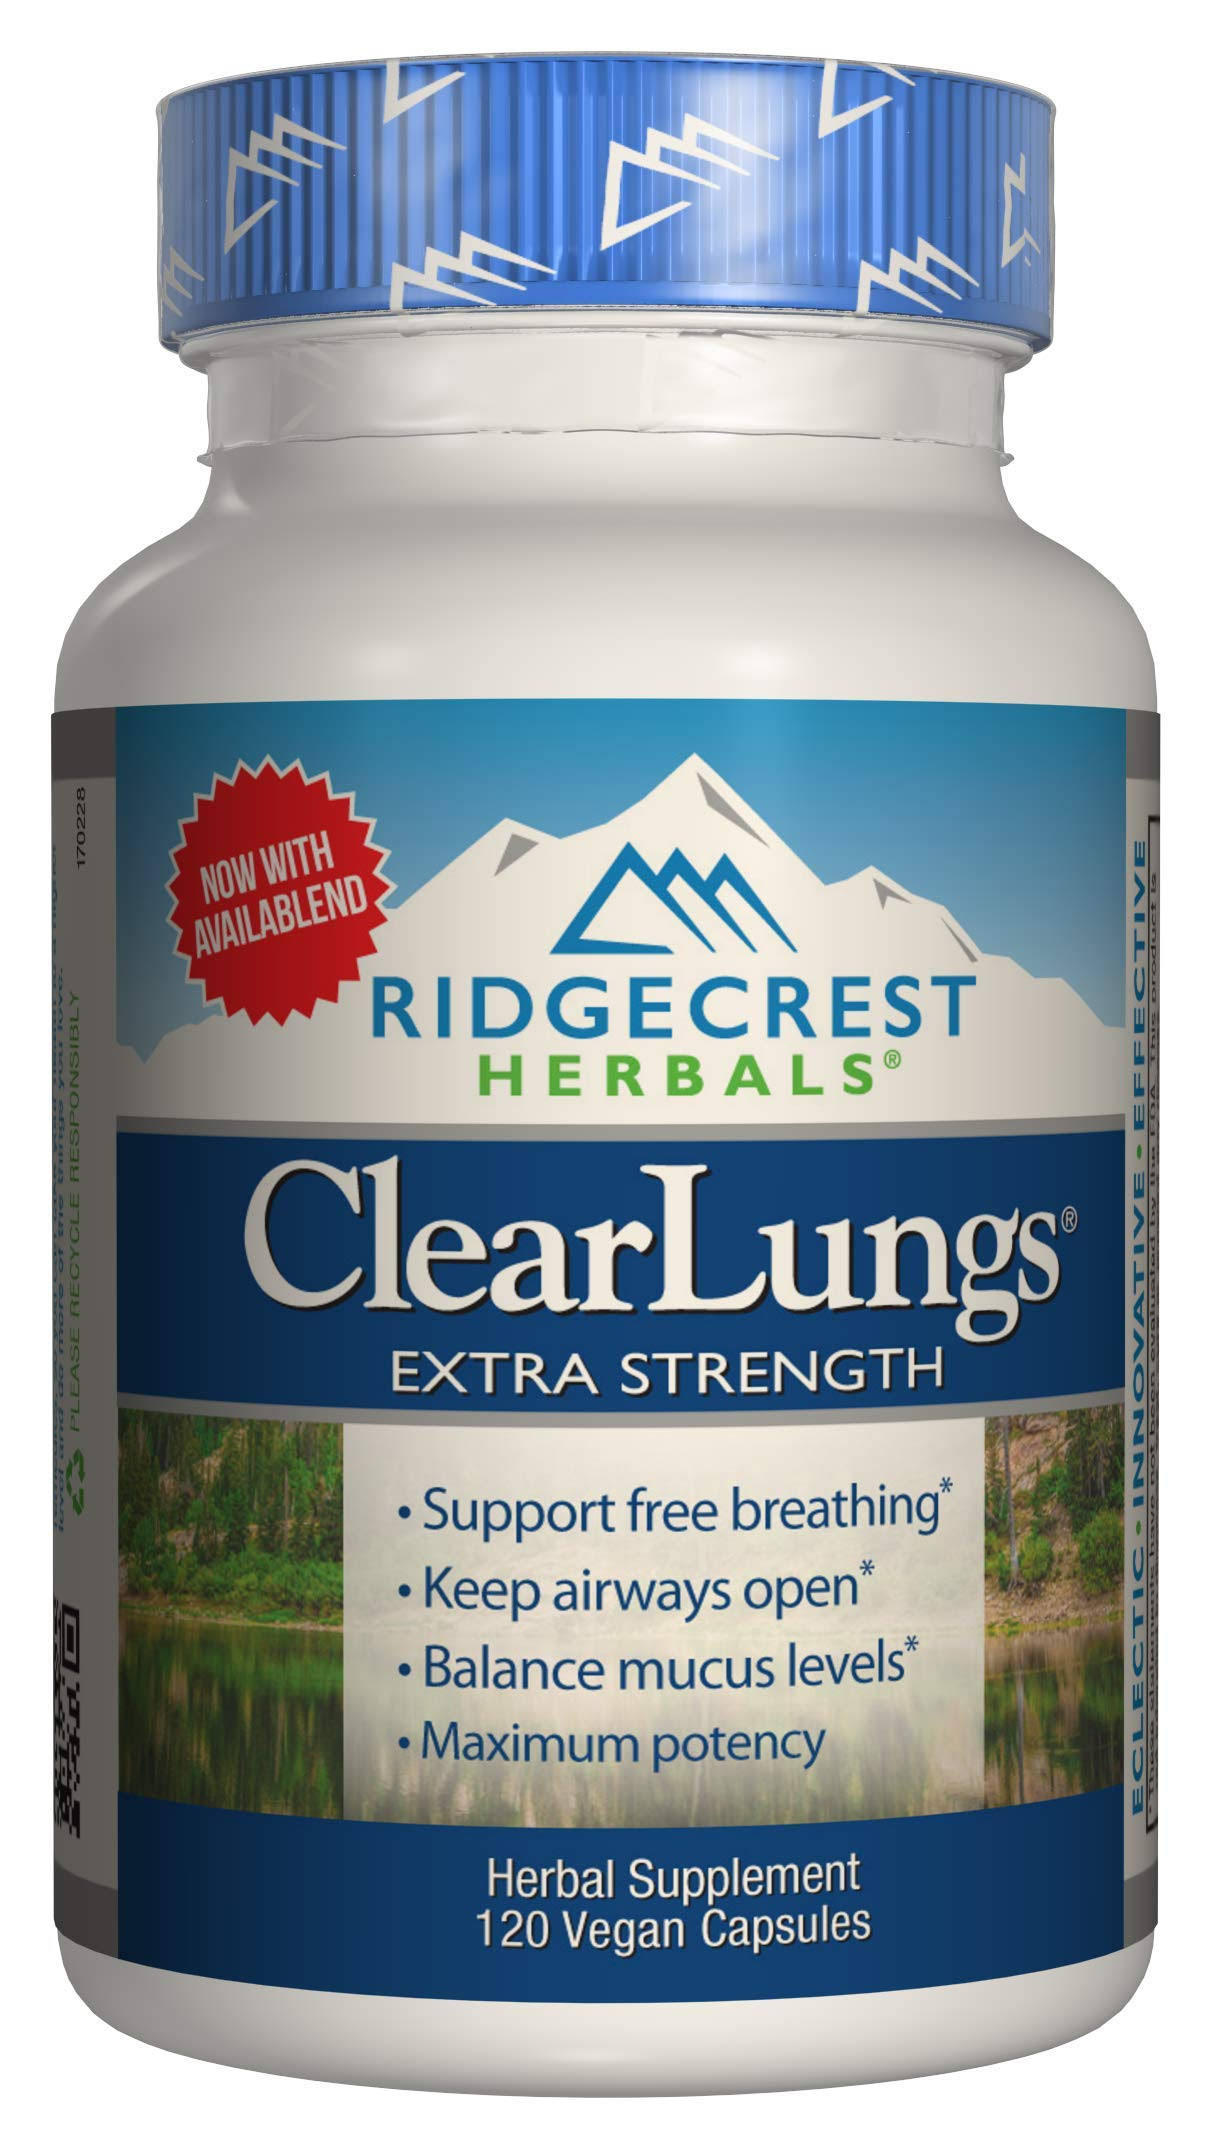 Ridgecrest Herbals Extra Strength ClearLungs Dietary Supplement - 120ct